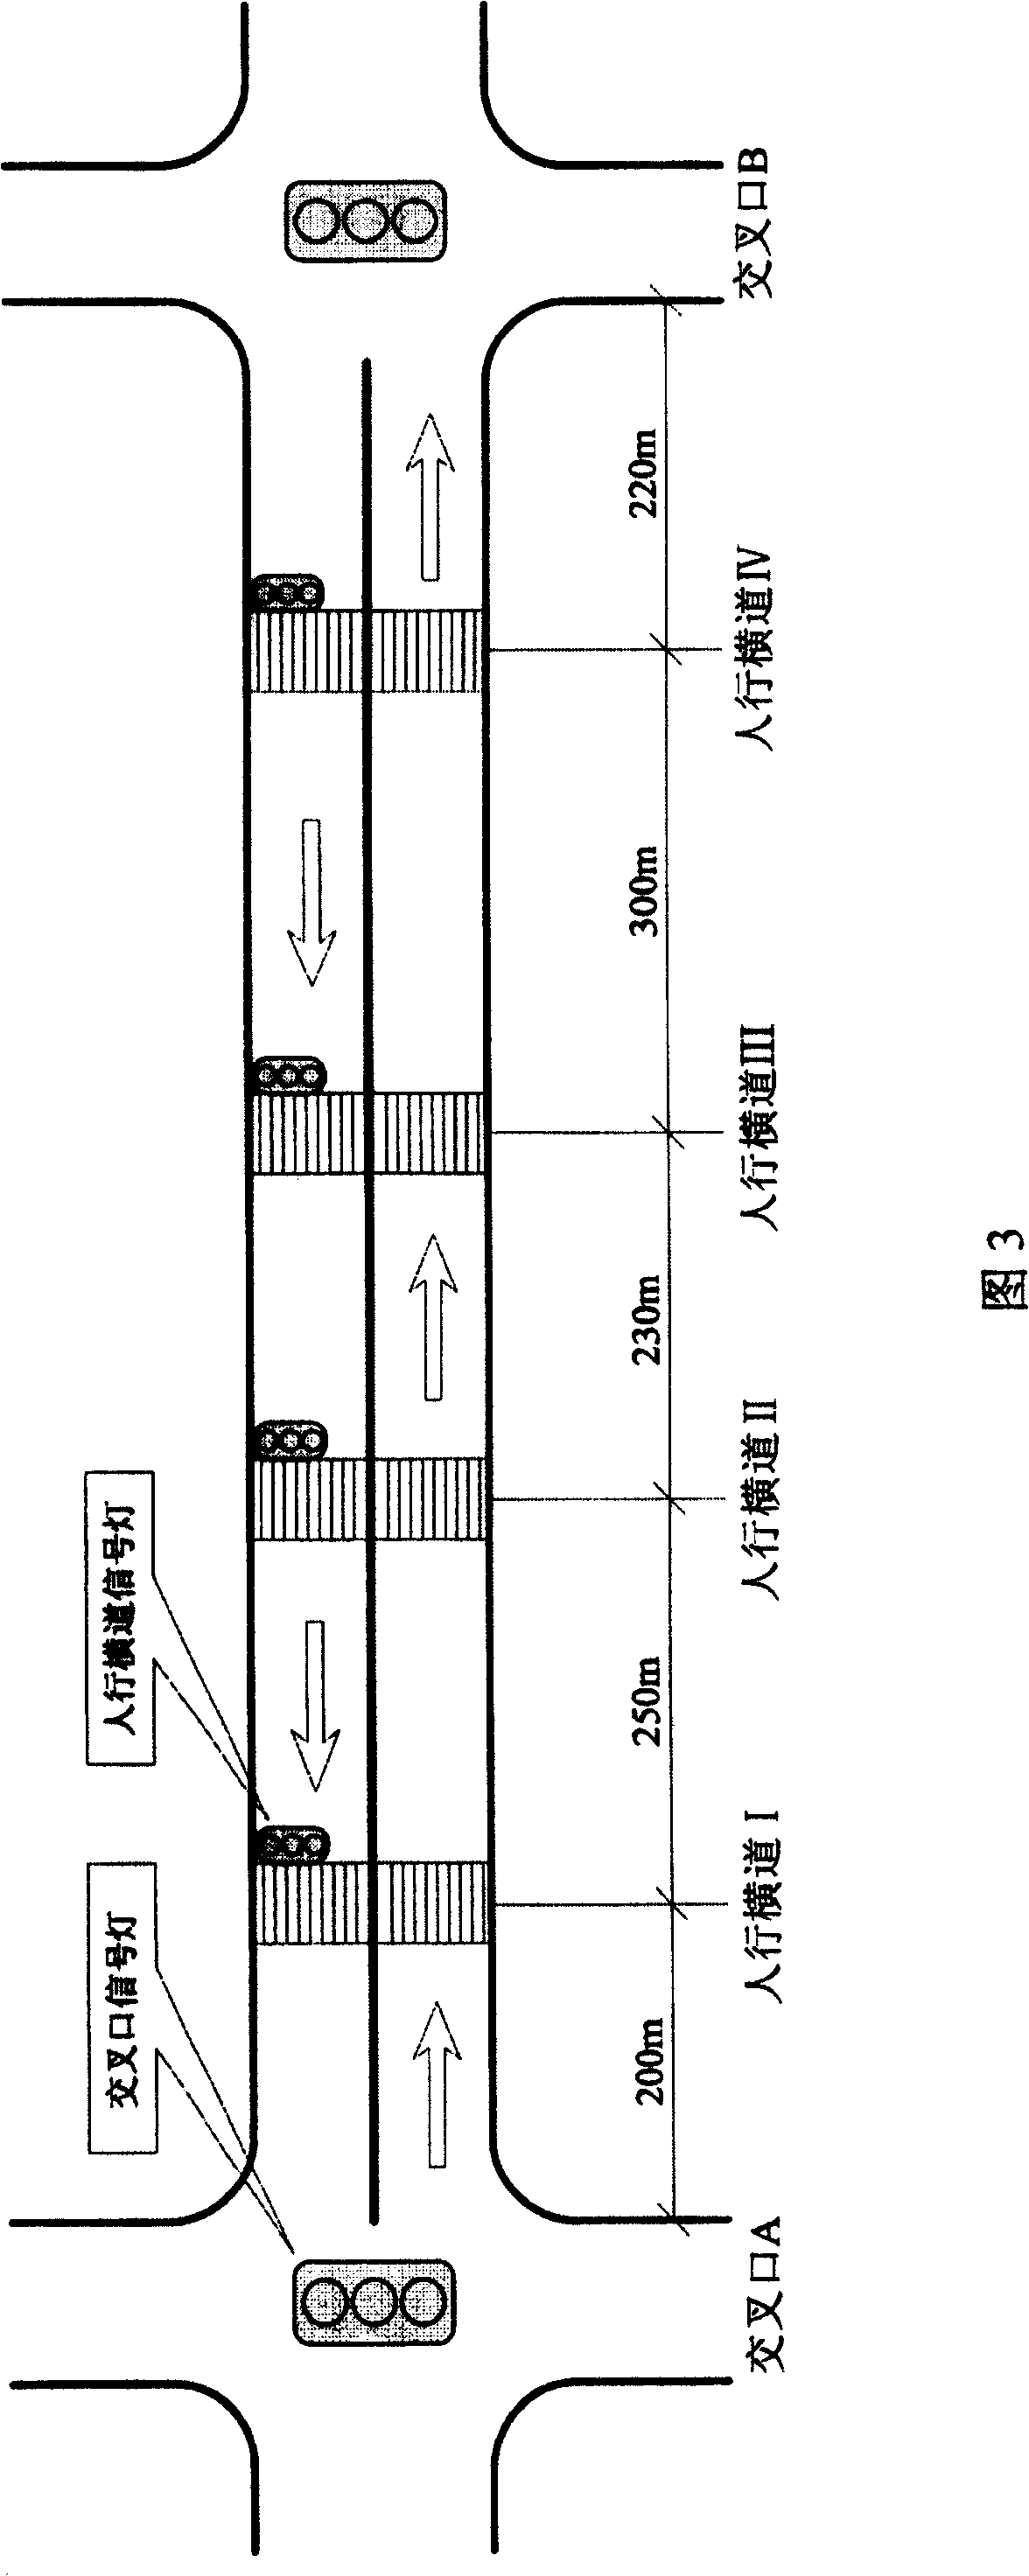 Automatic control method for green wave of pedestrian crossing street signal lamp